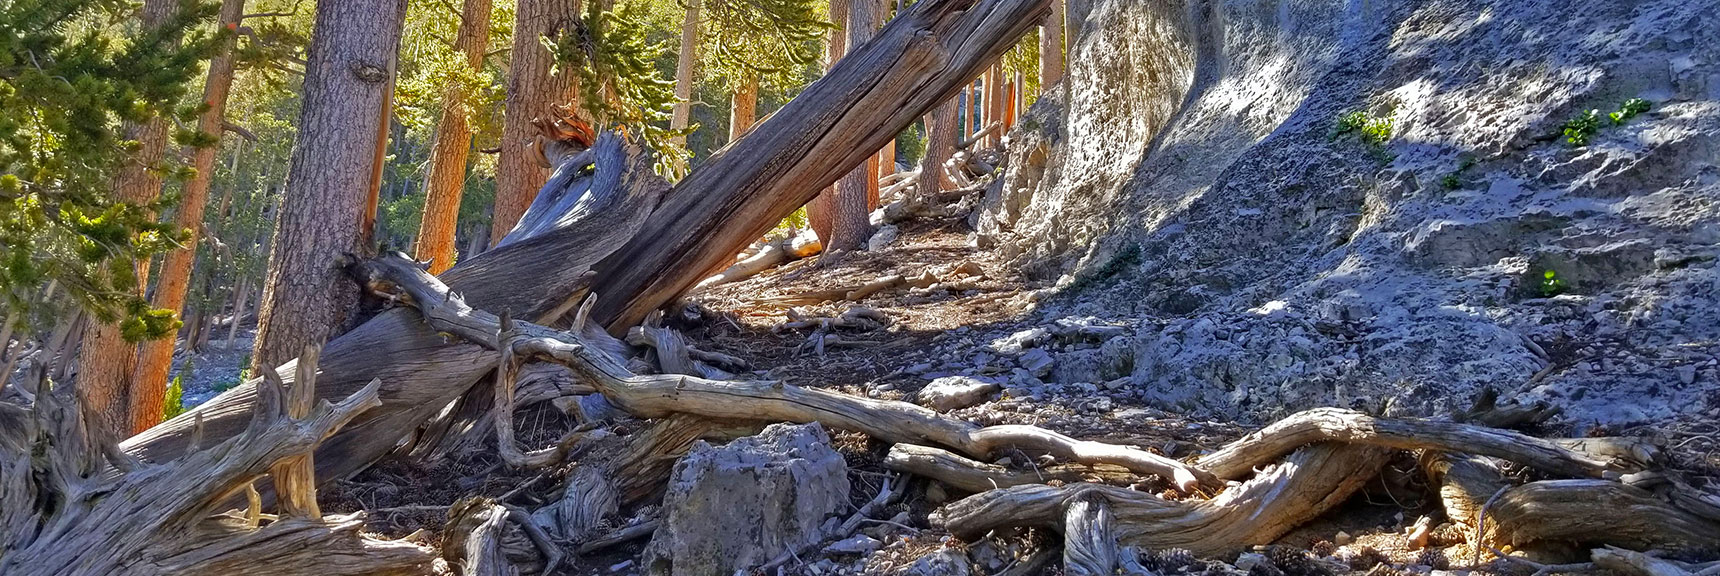 Passage Between the Cliff and Foxtail Canyon Wash Below | Lee to Kyle Canyon | Foxtail Approach | Mt Charleston Wilderness | Spring Mountains, Nevada